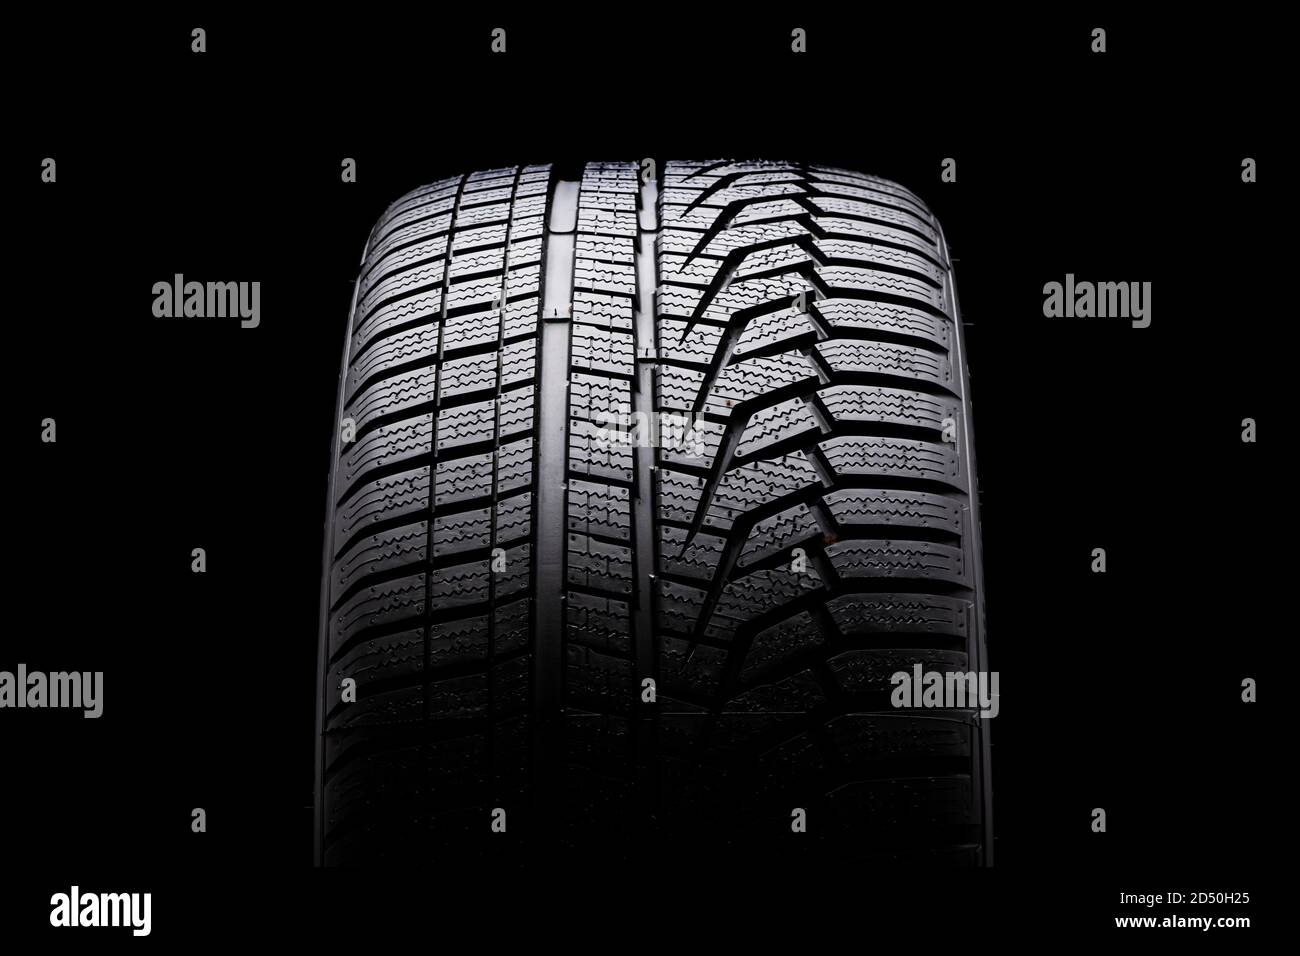 winter tire front view. Asymmetric tread pattern. re-inflating tires for the season. close-up black background Stock Photo